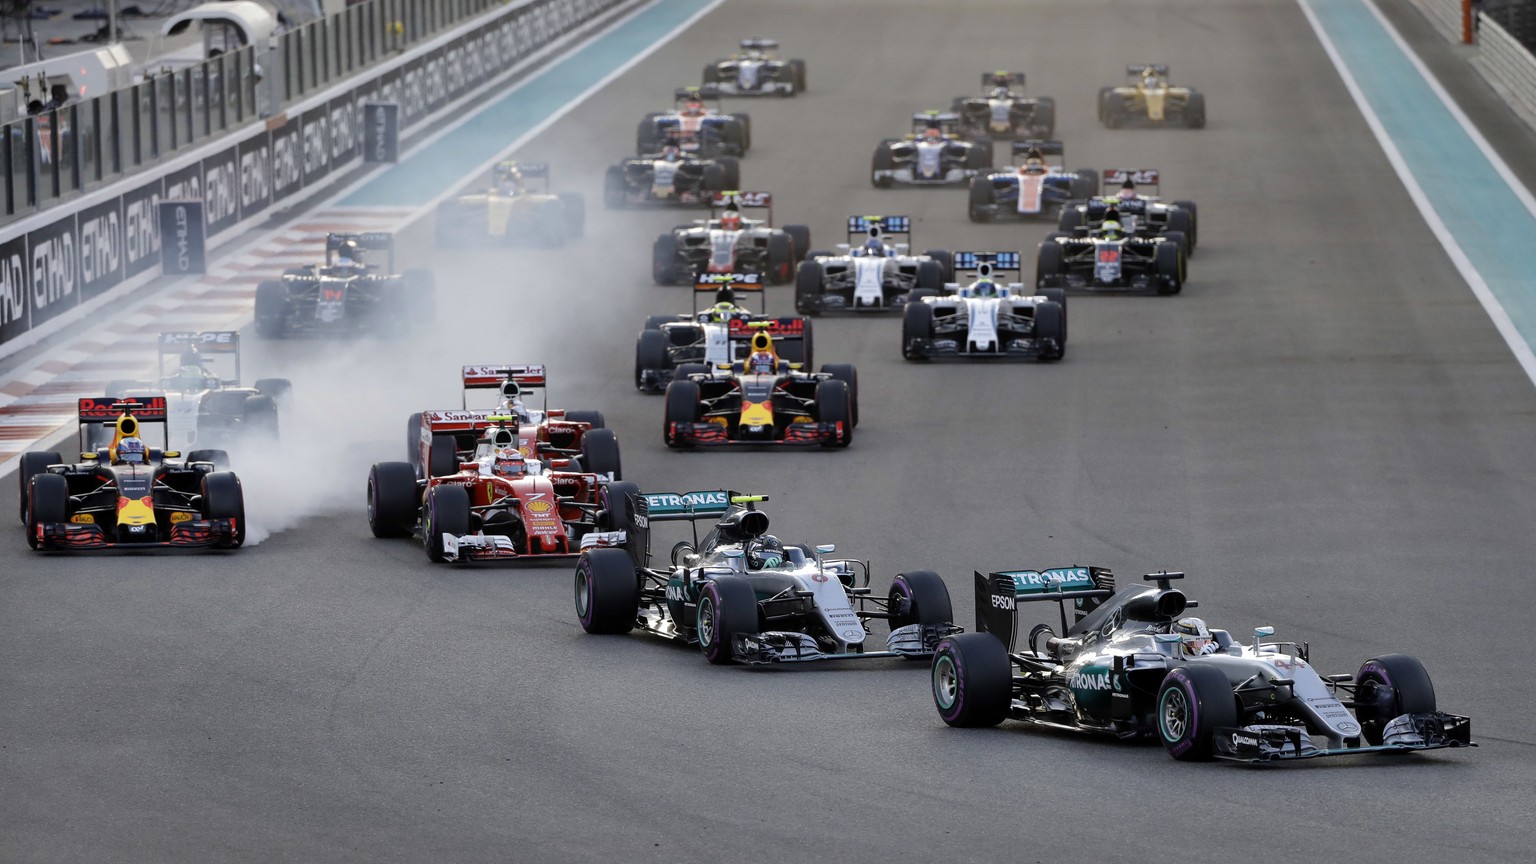 Mercedes driver Lewis Hamilton of Britain, right, leads teammate Mercedes driver Nico Rosberg of Germany at the start of the Emirates Formula One Grand Prix at the Yas Marina racetrack in Abu Dhabi, U ...